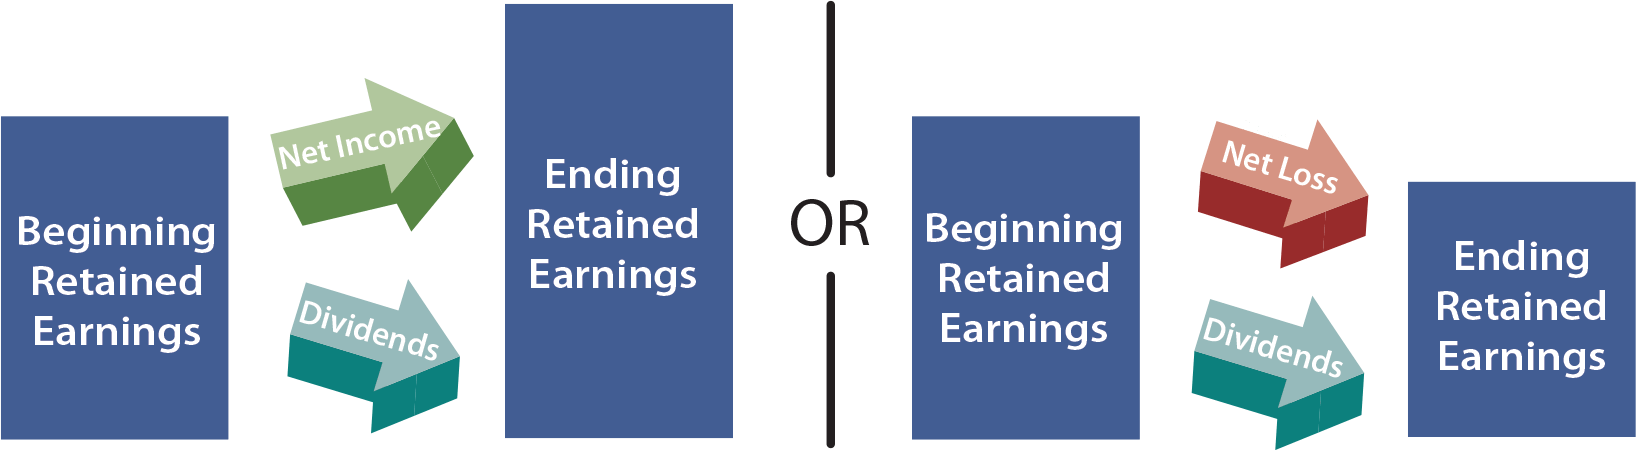 Statement of Retained Earnings Increases and Decreases